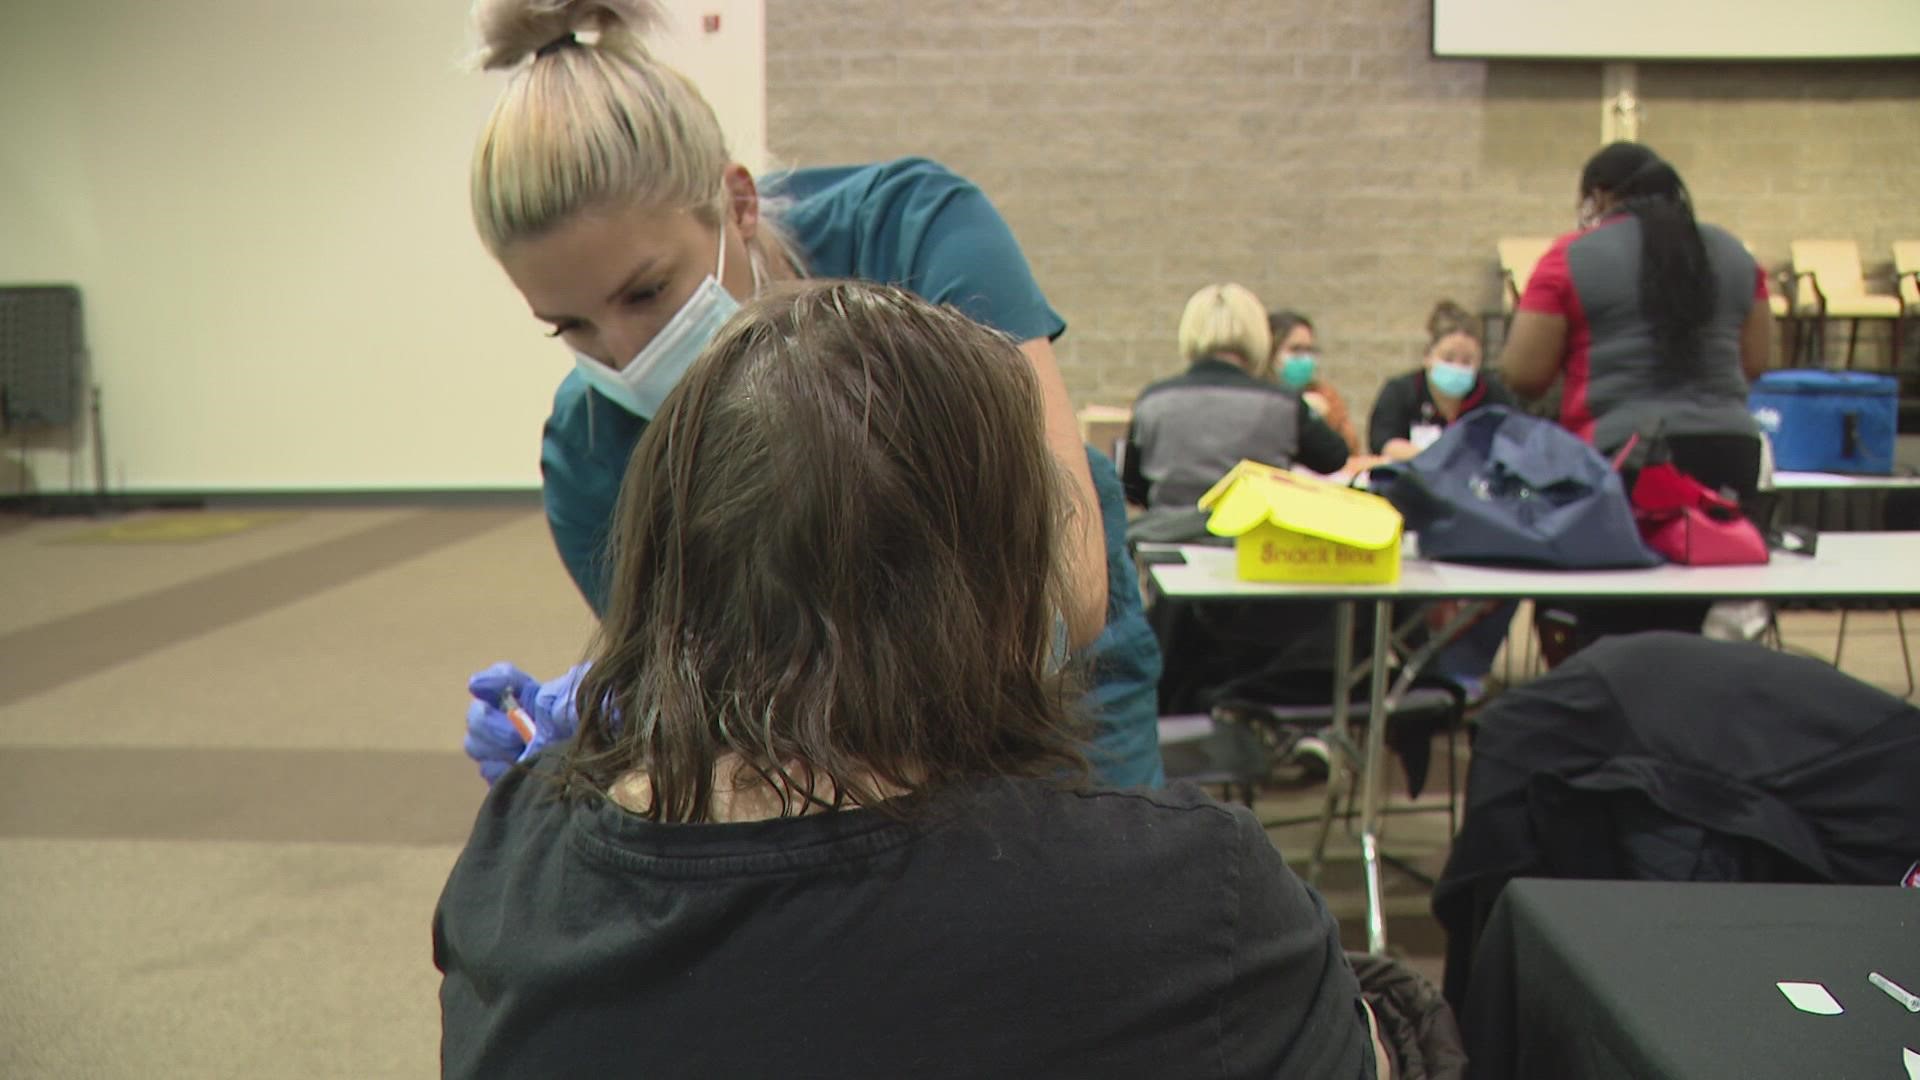 Doctors are urging people to get a flu shot.